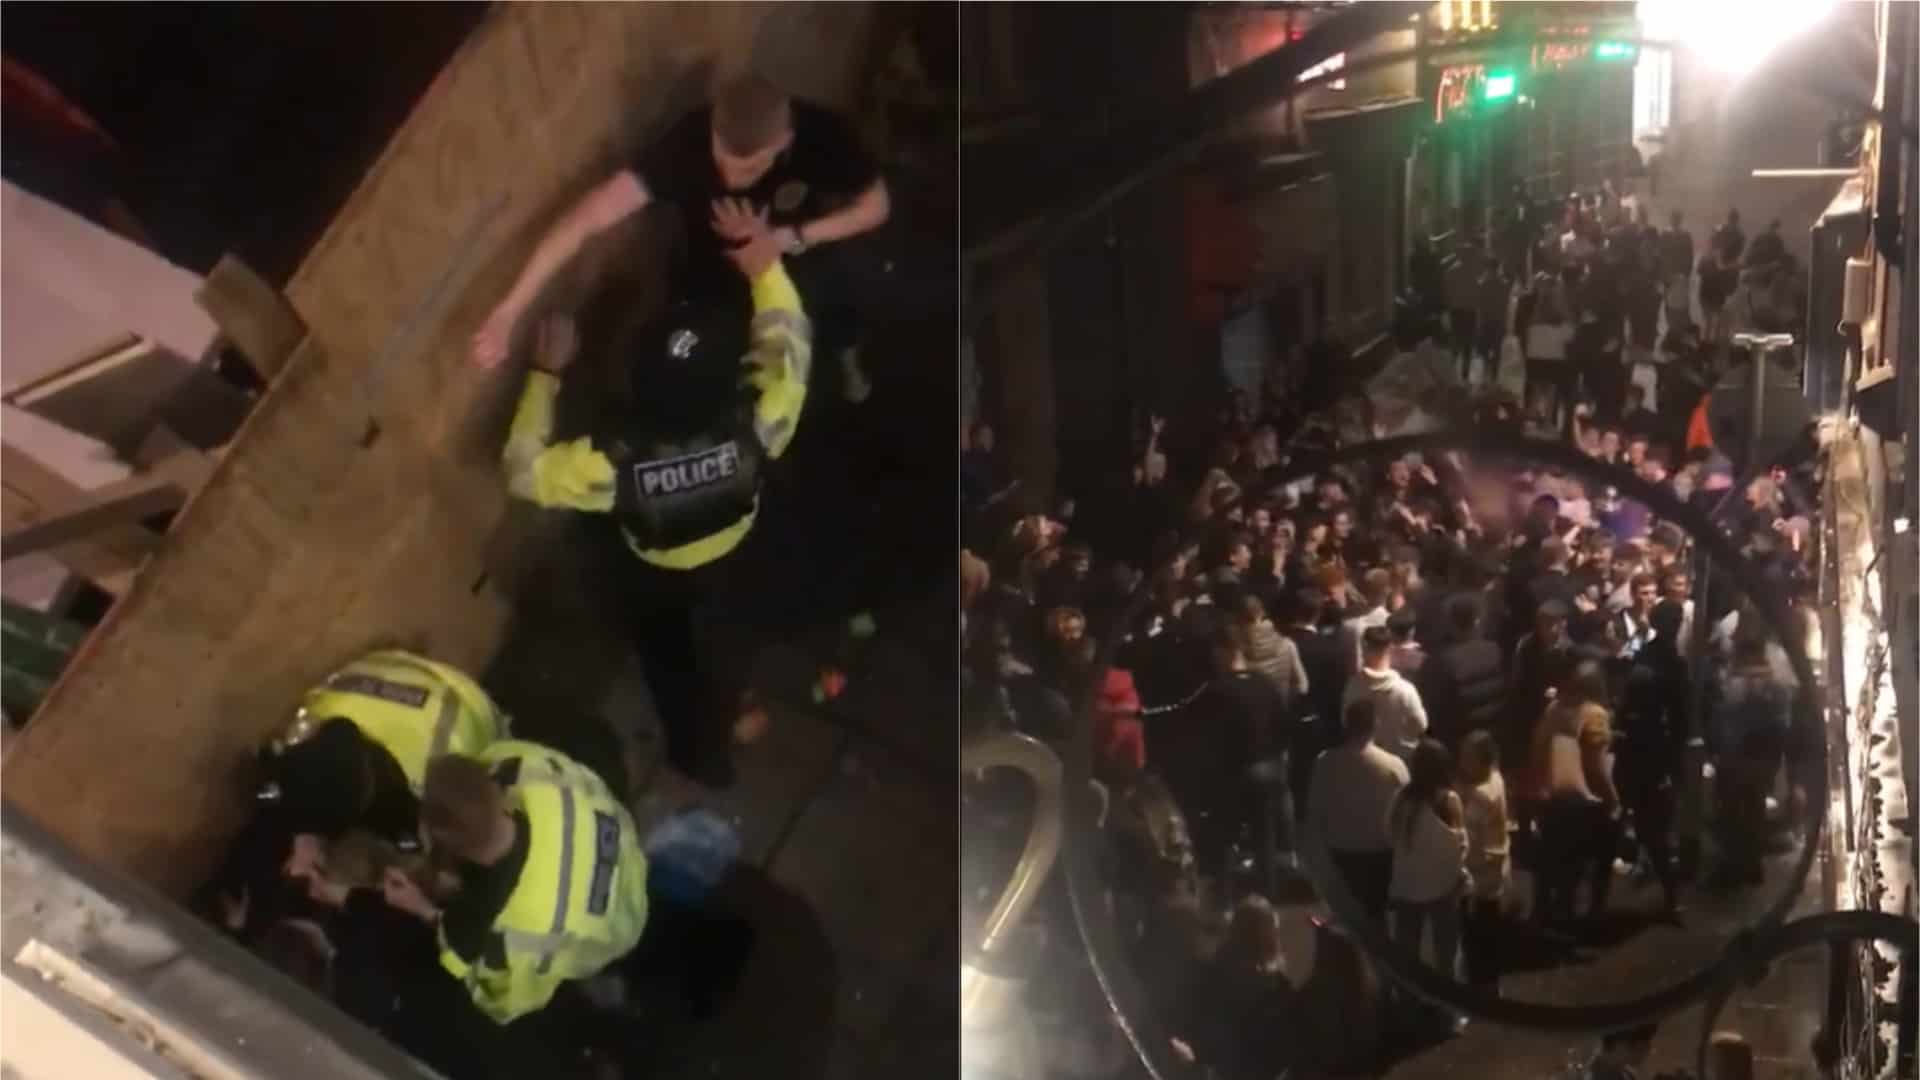 Police issue warnings to Nottingham revellers as hospital admissions boom in the city